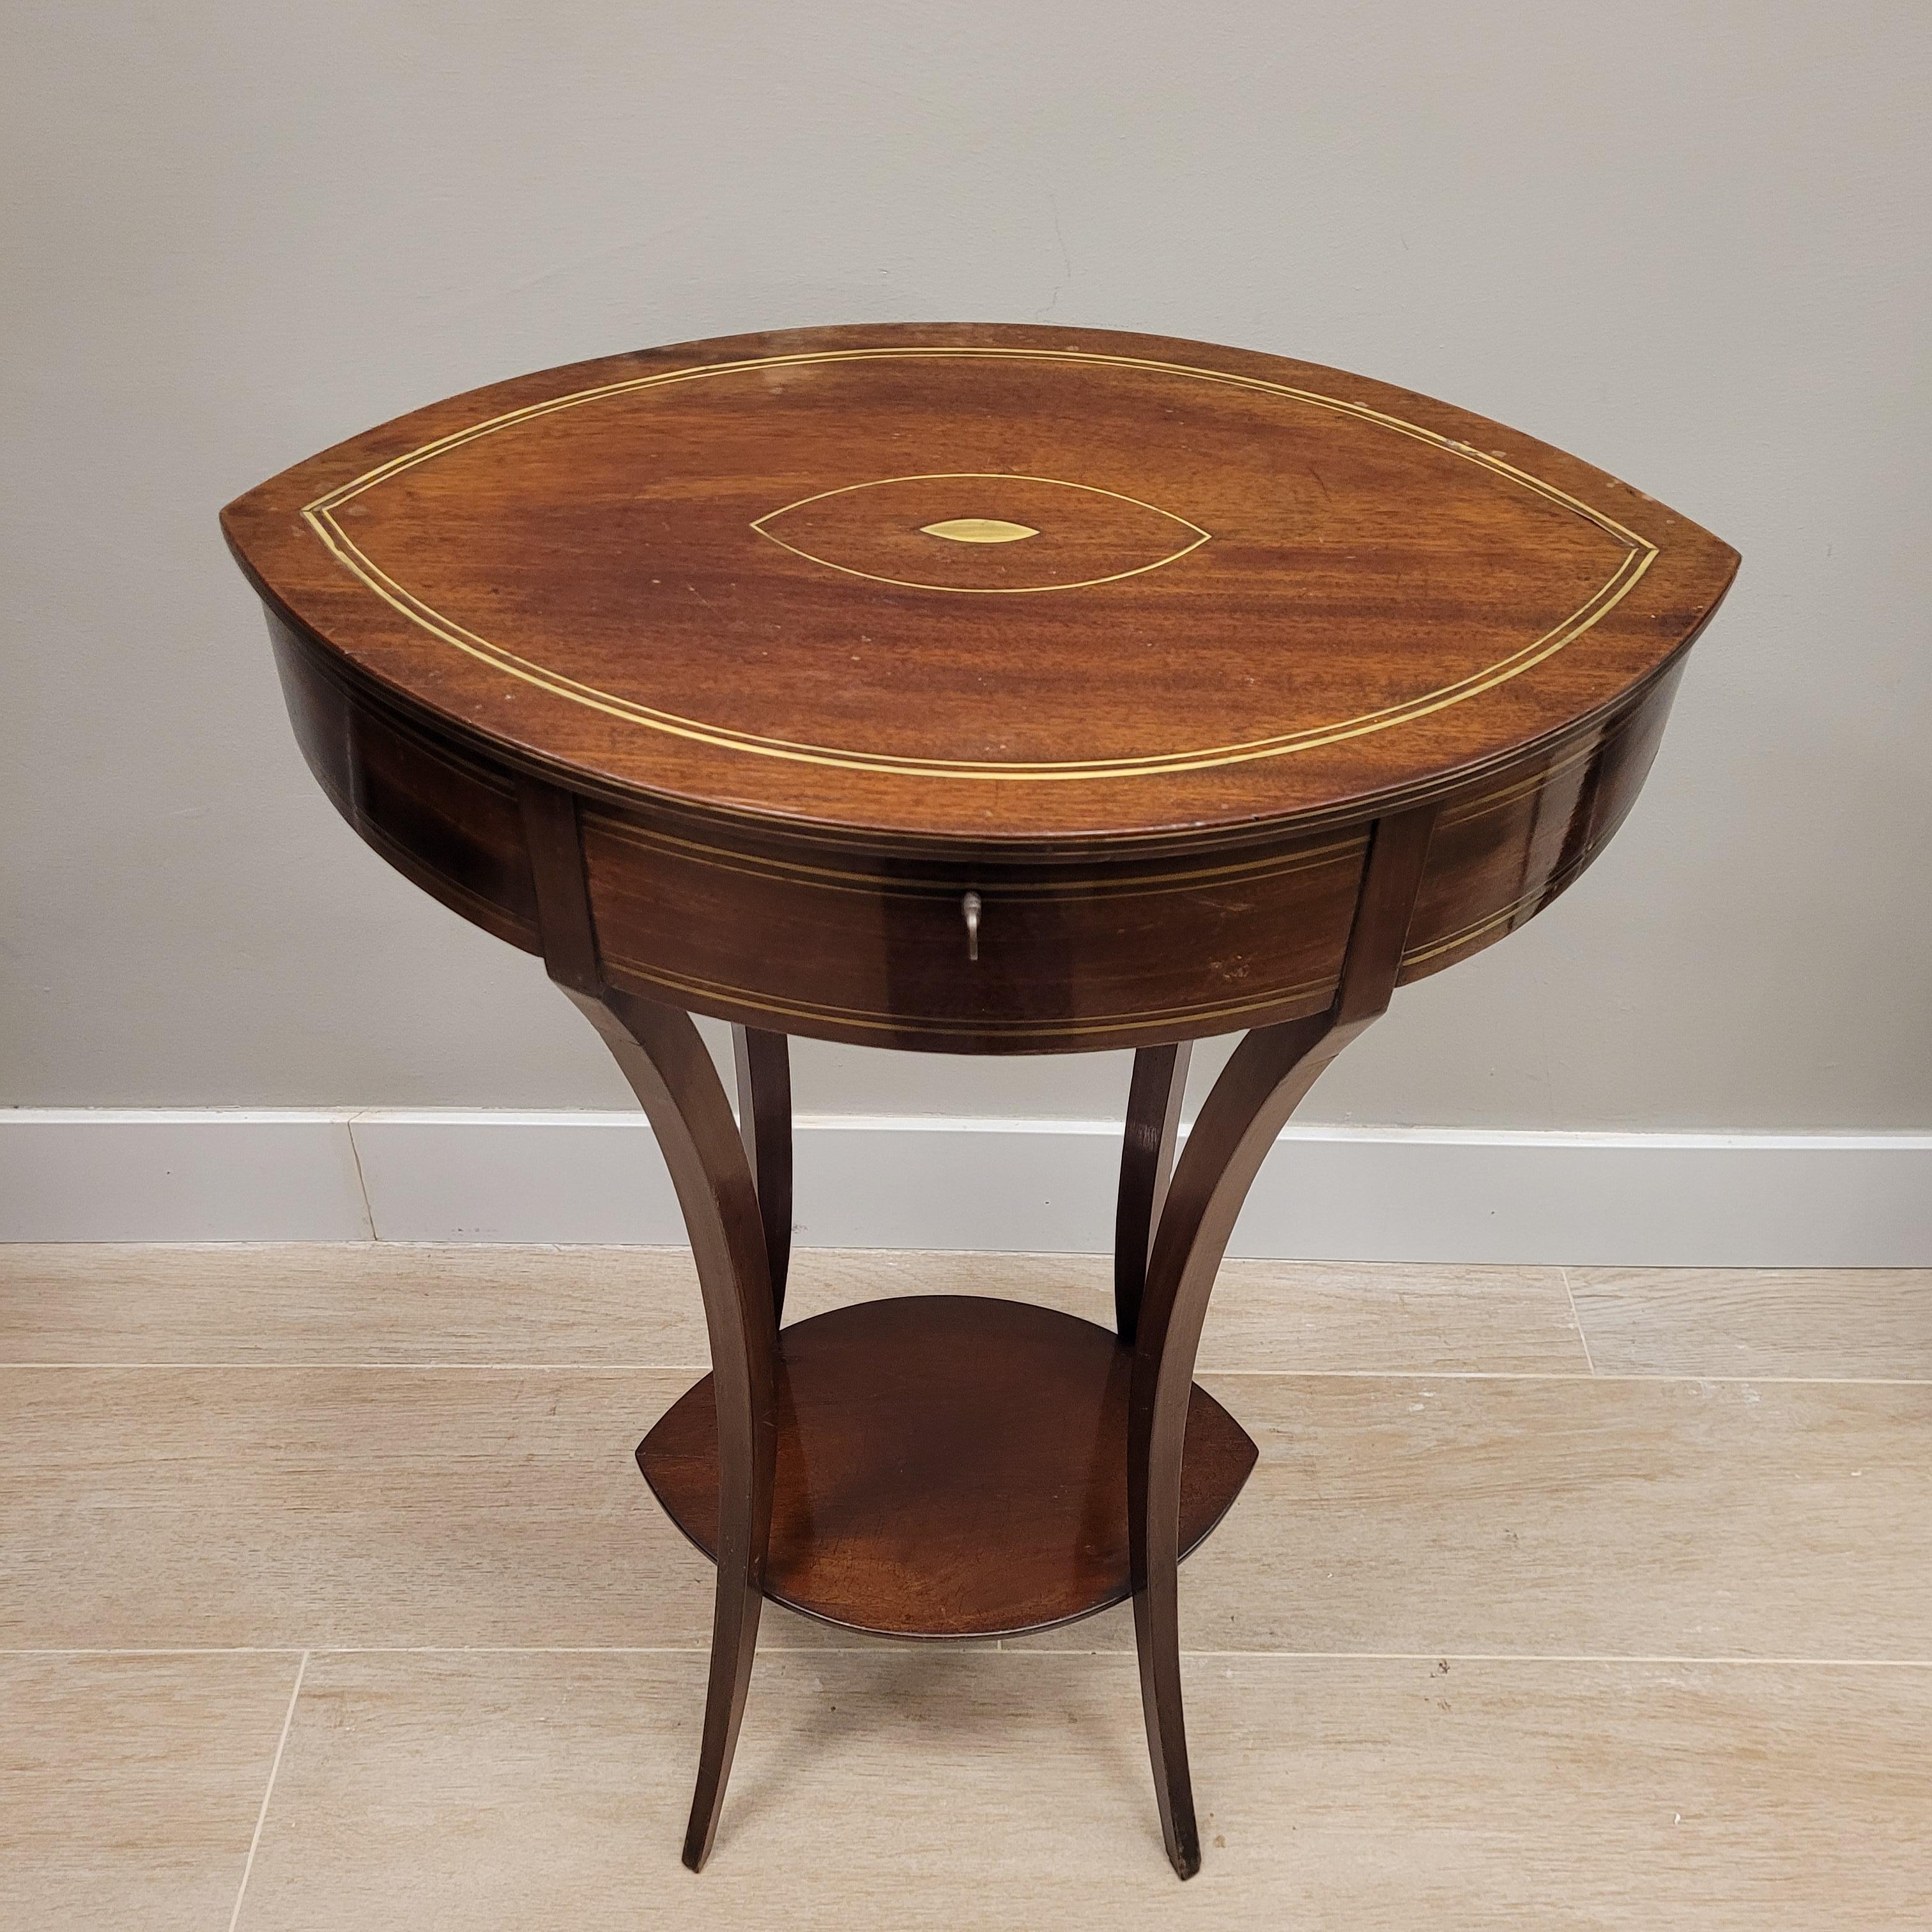 Gorgeous and very refined  and elegant Charles X sewing box and leaf shaped table , around 1830  France. This small side table is made of mahogany wood and gold brass threaded inlays. It is structured in a simple and light way, the main body has an